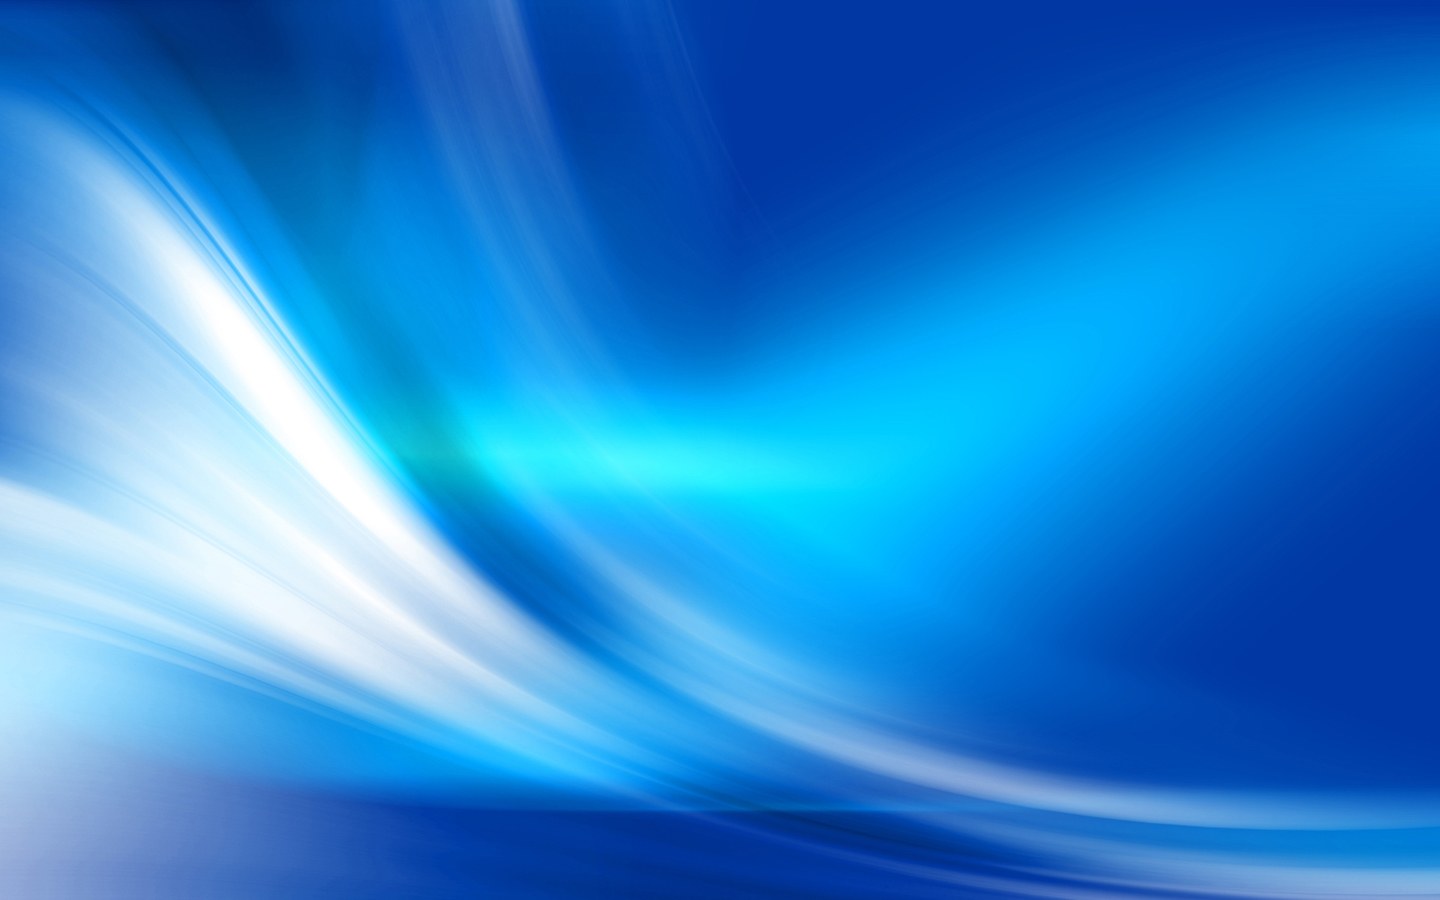 Abstract Light Blue Wallpaper Image